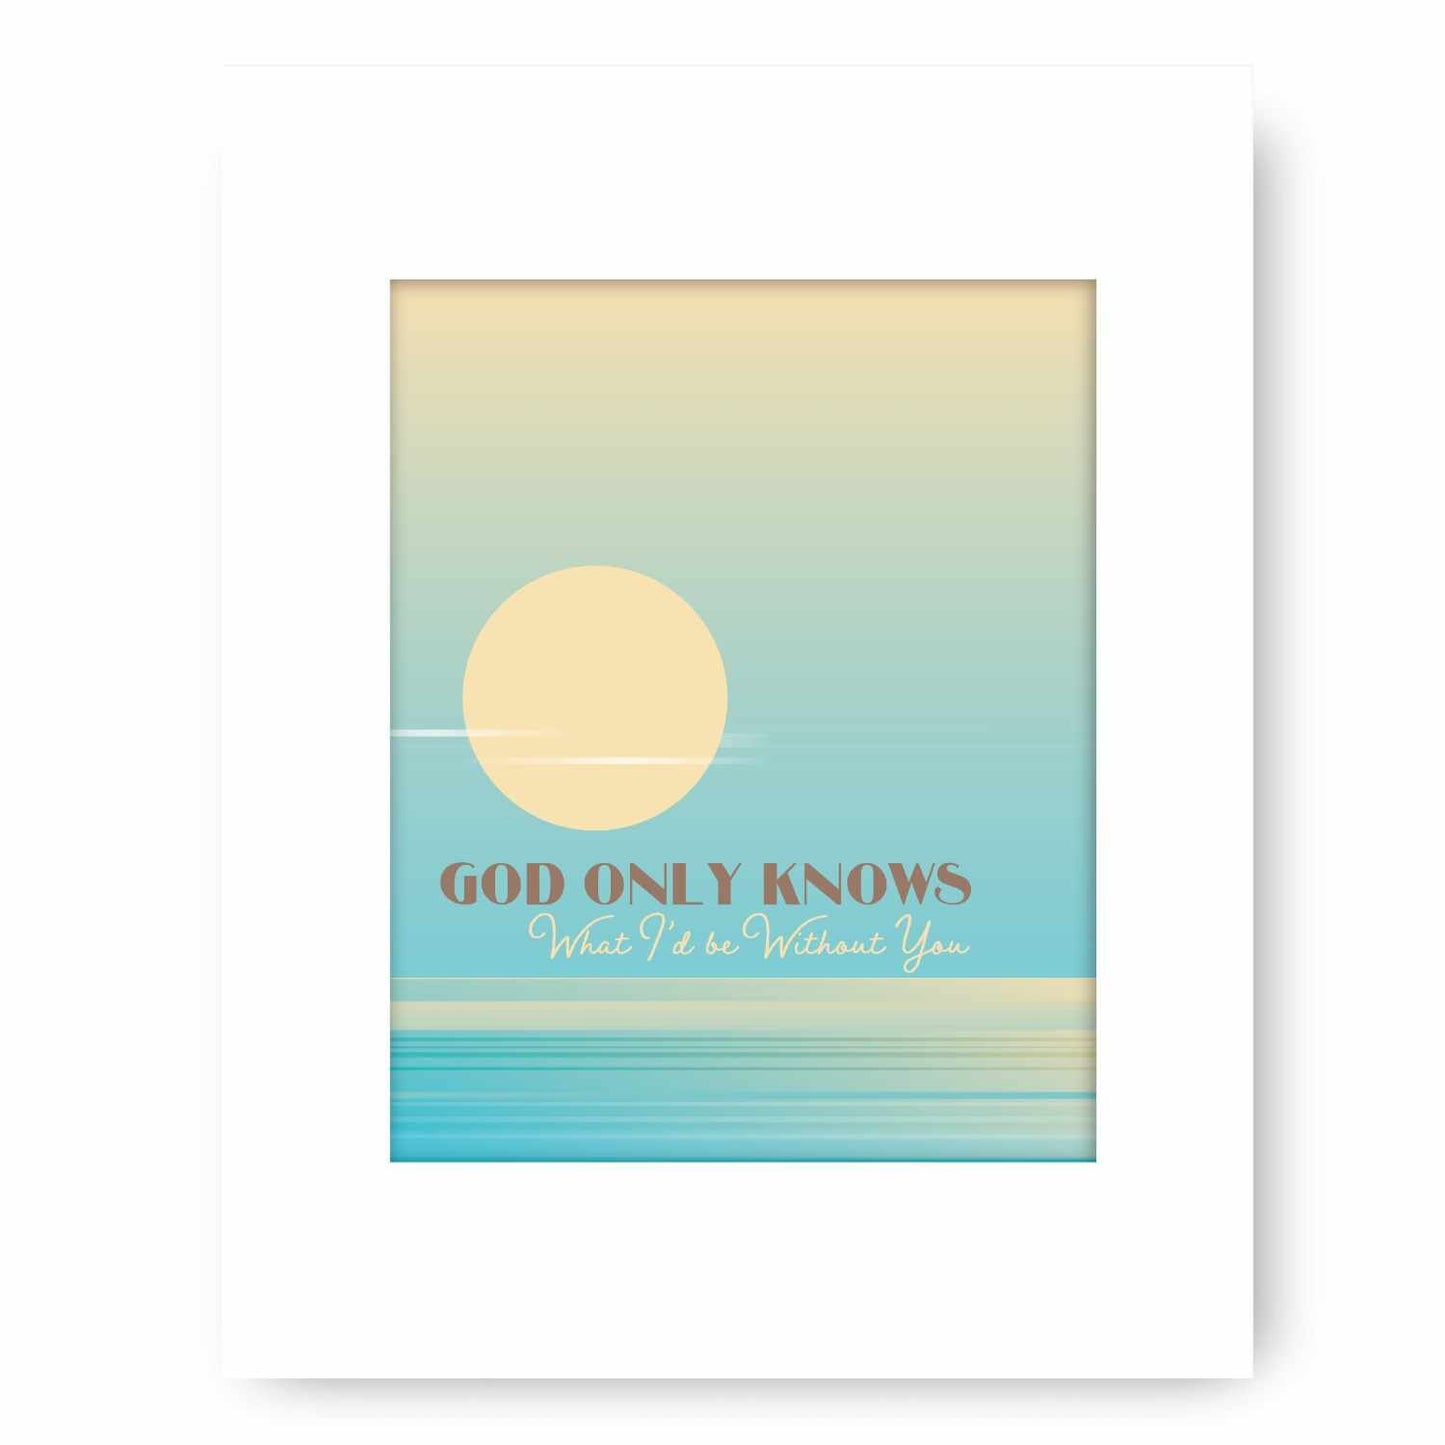 God Only Knows by the Beach Boys - Song Lyric Wall Art Song Lyrics Art Song Lyrics Art 8x10 White Matted Print 